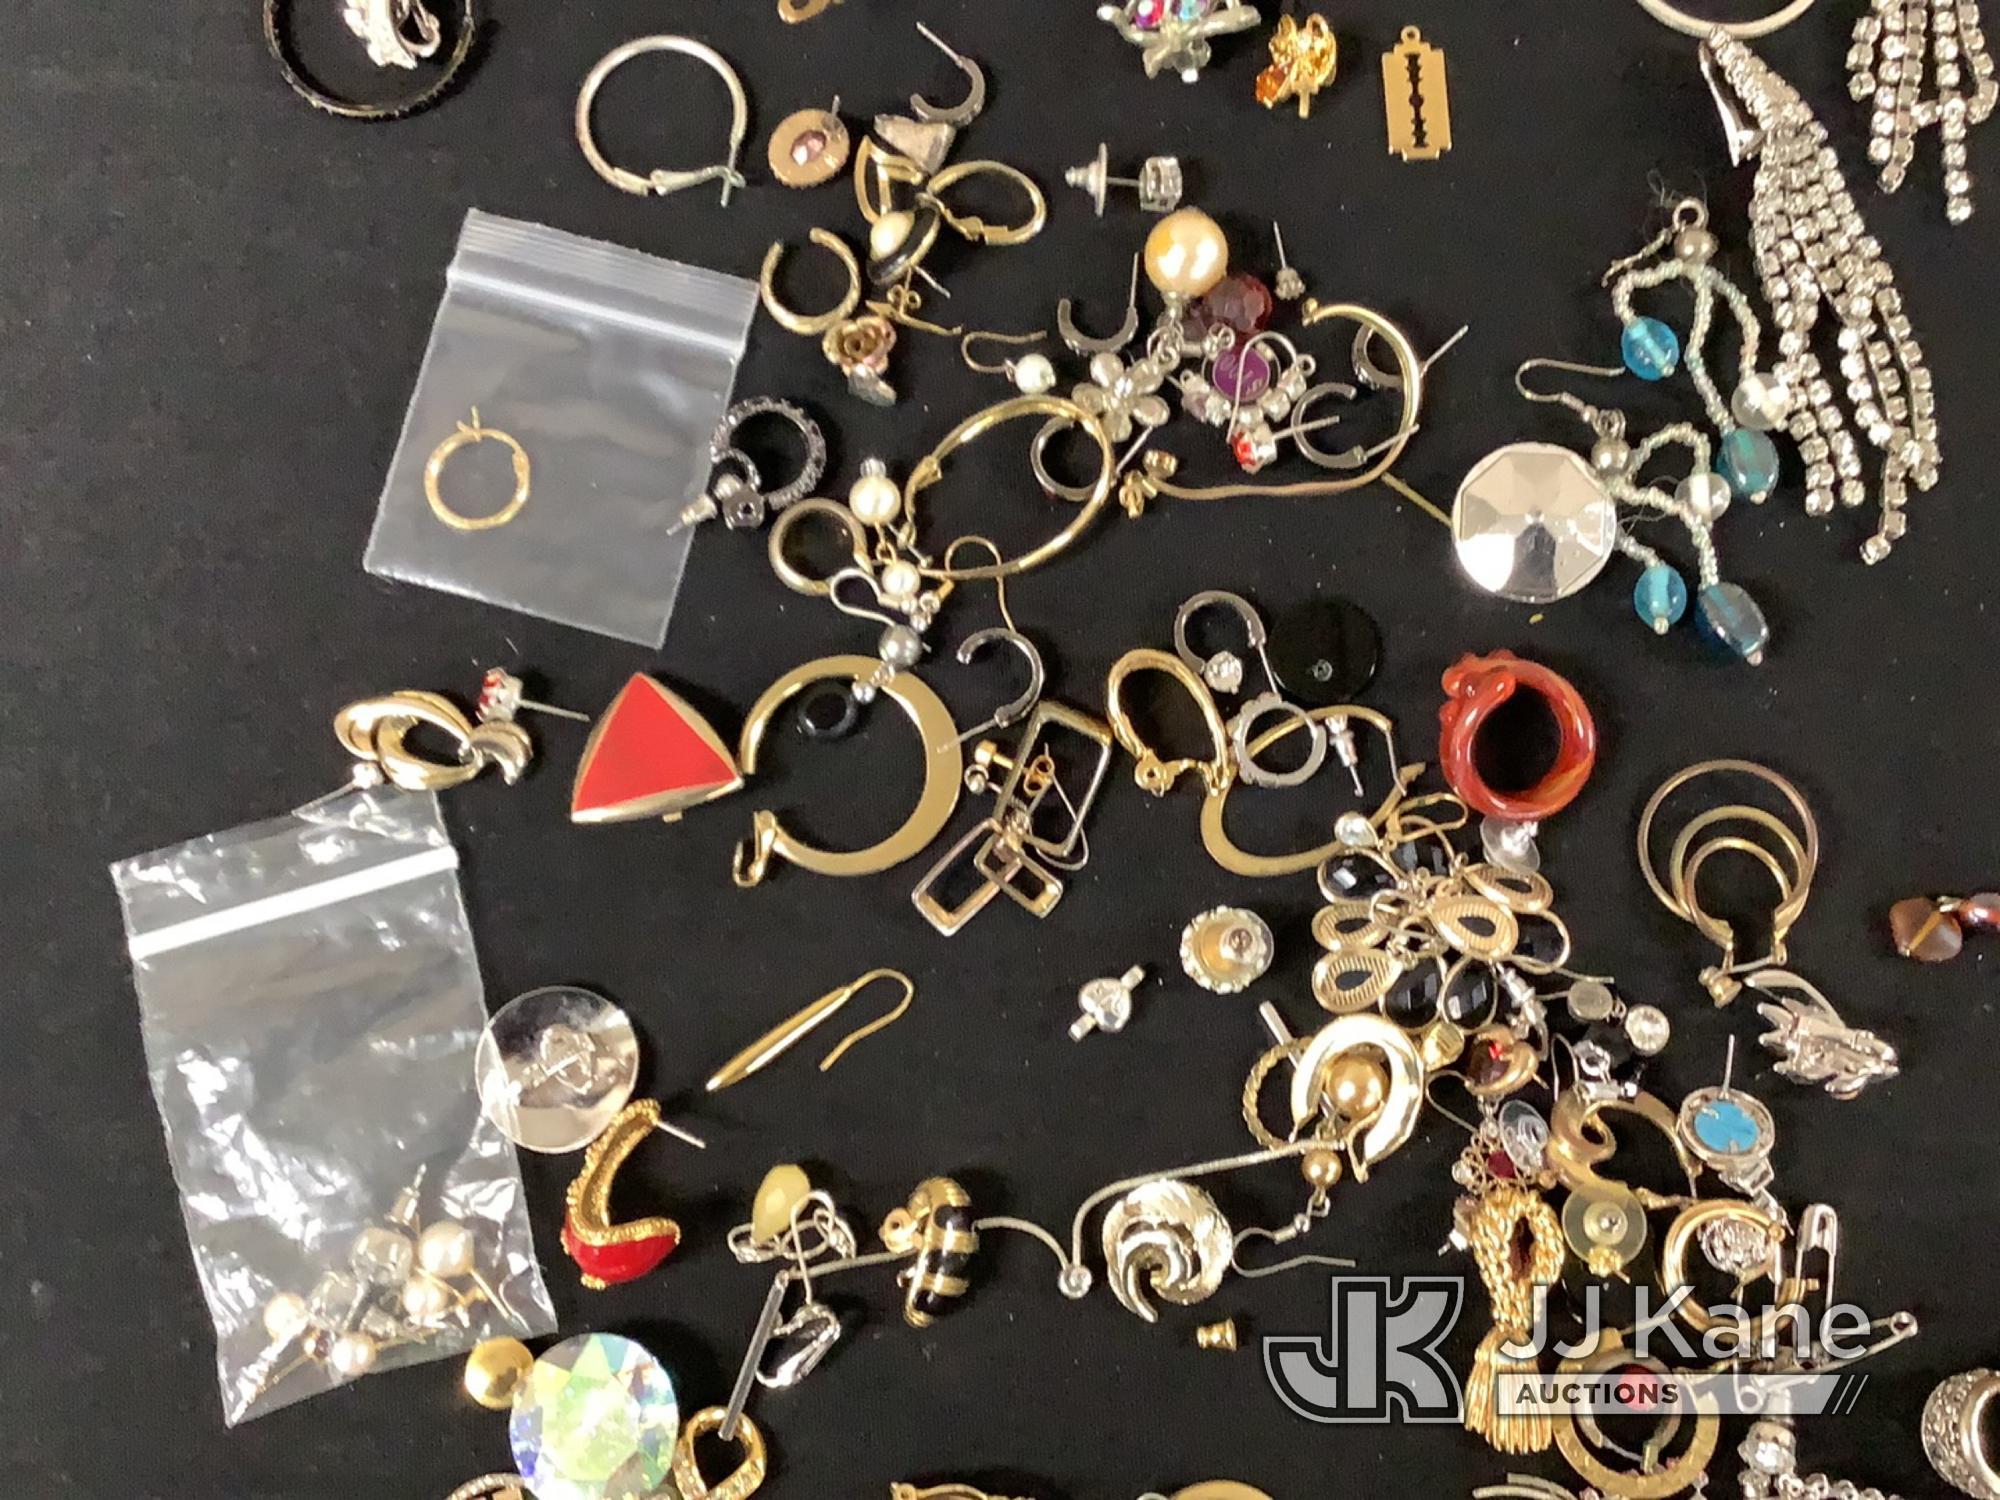 (Jurupa Valley, CA) Mixed jewelry | possibly costume jewelry | authenticity unknown (Used) NOTE: Thi